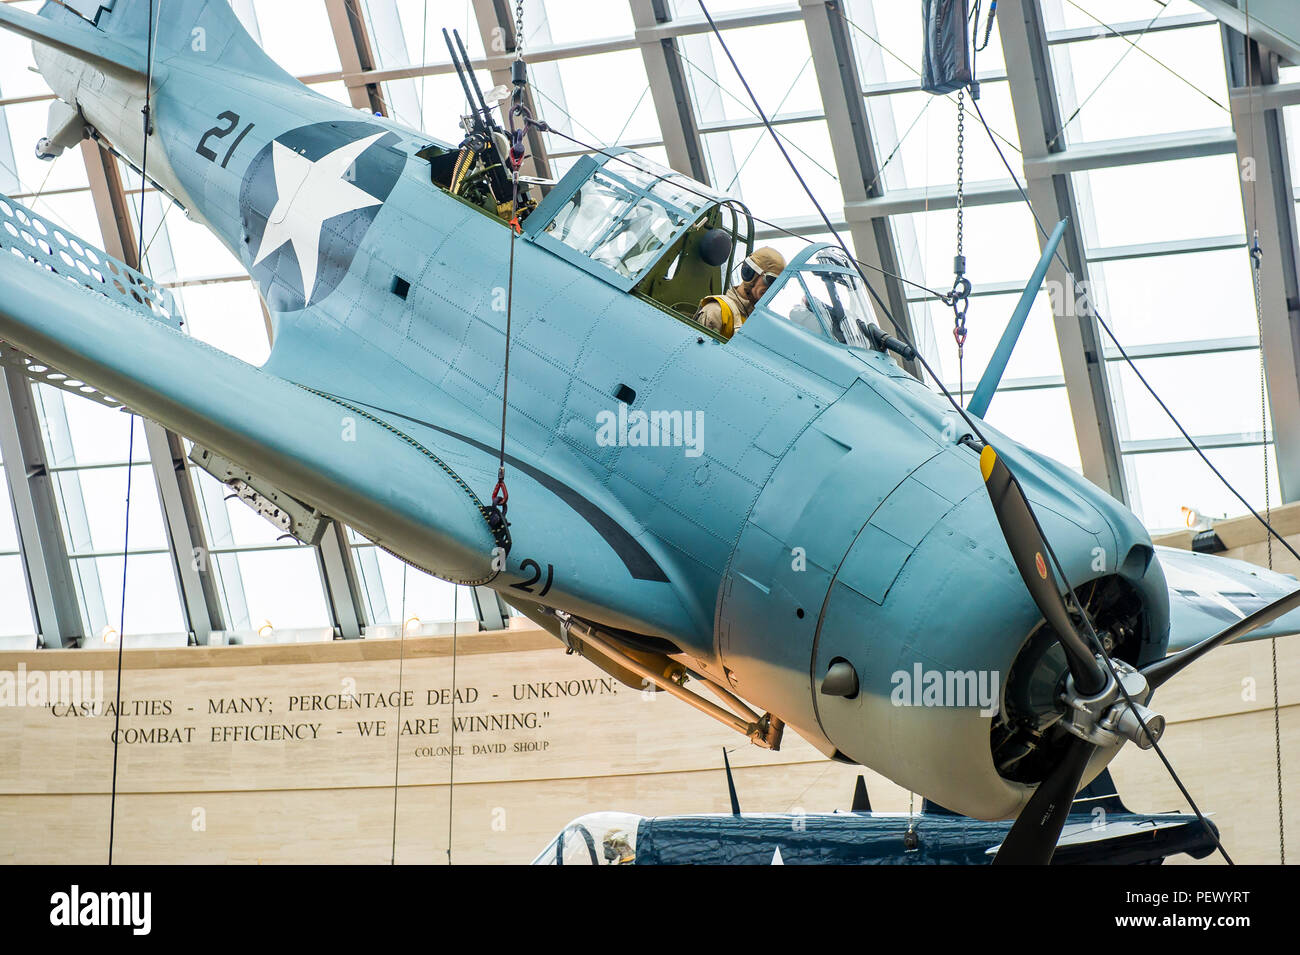 An SBD-3 (Scout Bomber Douglas) Dauntless, is weight tested, lifted and installed as part of the World War II exhibit at the National Museum of the Marine Corps, Triangle, Va., Feb. 9, 2016. This fully restored, donated aircraft has been painted to represent the SBD-3 flown by Maj. Richard C. Mangram and Cpl. Dennis E. Byrd during the Guadalcanal Campaign on Aug. 25, 1942. (Official United States Marine Corps photo by Kathy Reesey/Released) Stock Photo